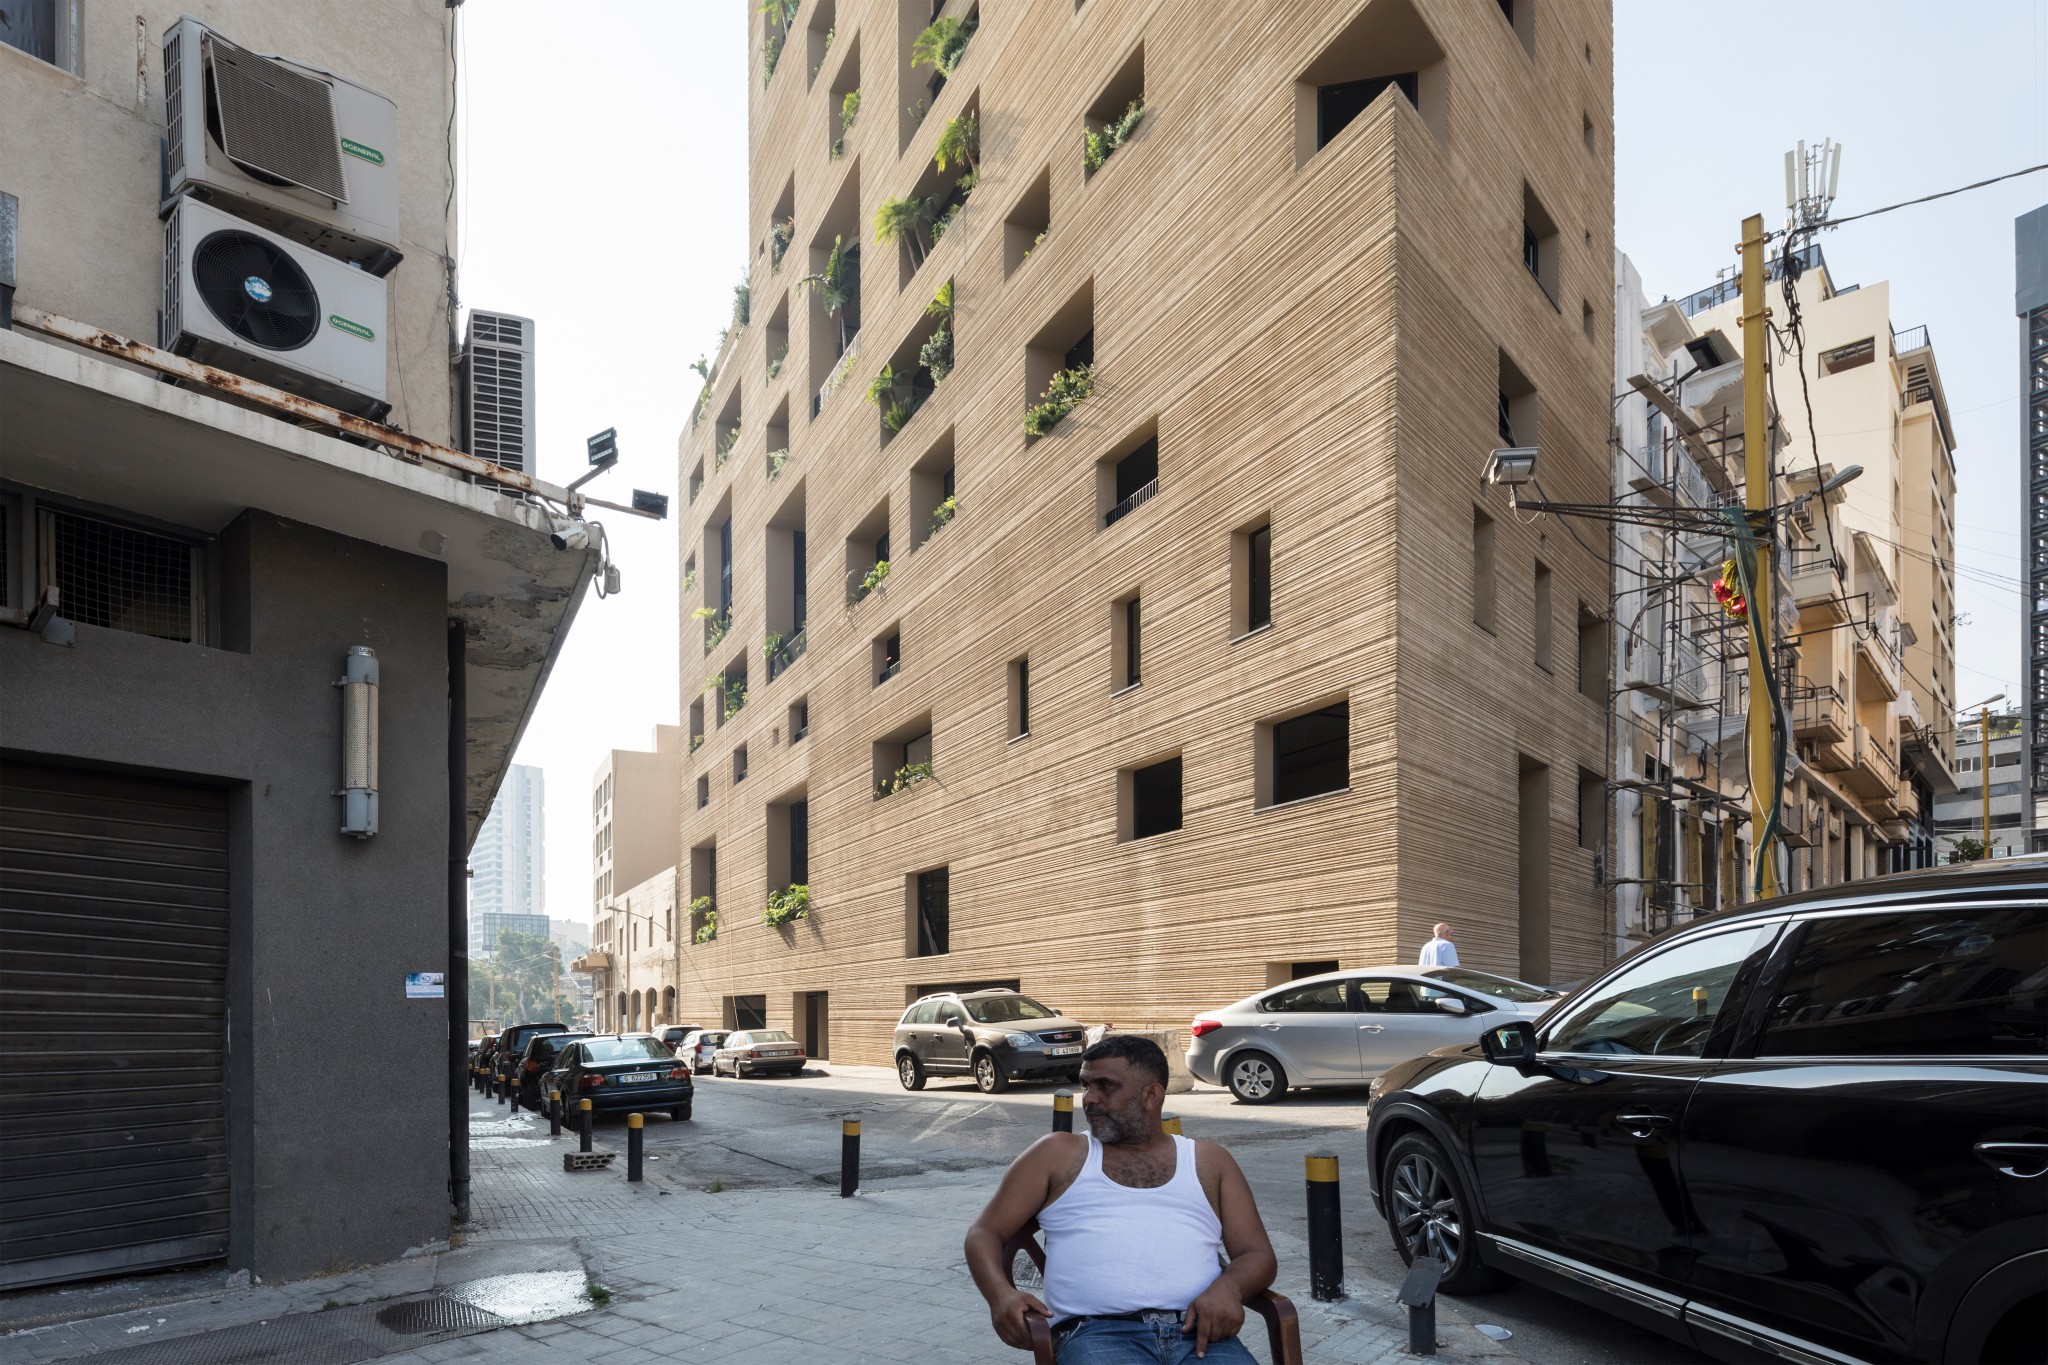 Stone Garden — Mina Image Center and Housing by Lina Ghotmeh — Architecture